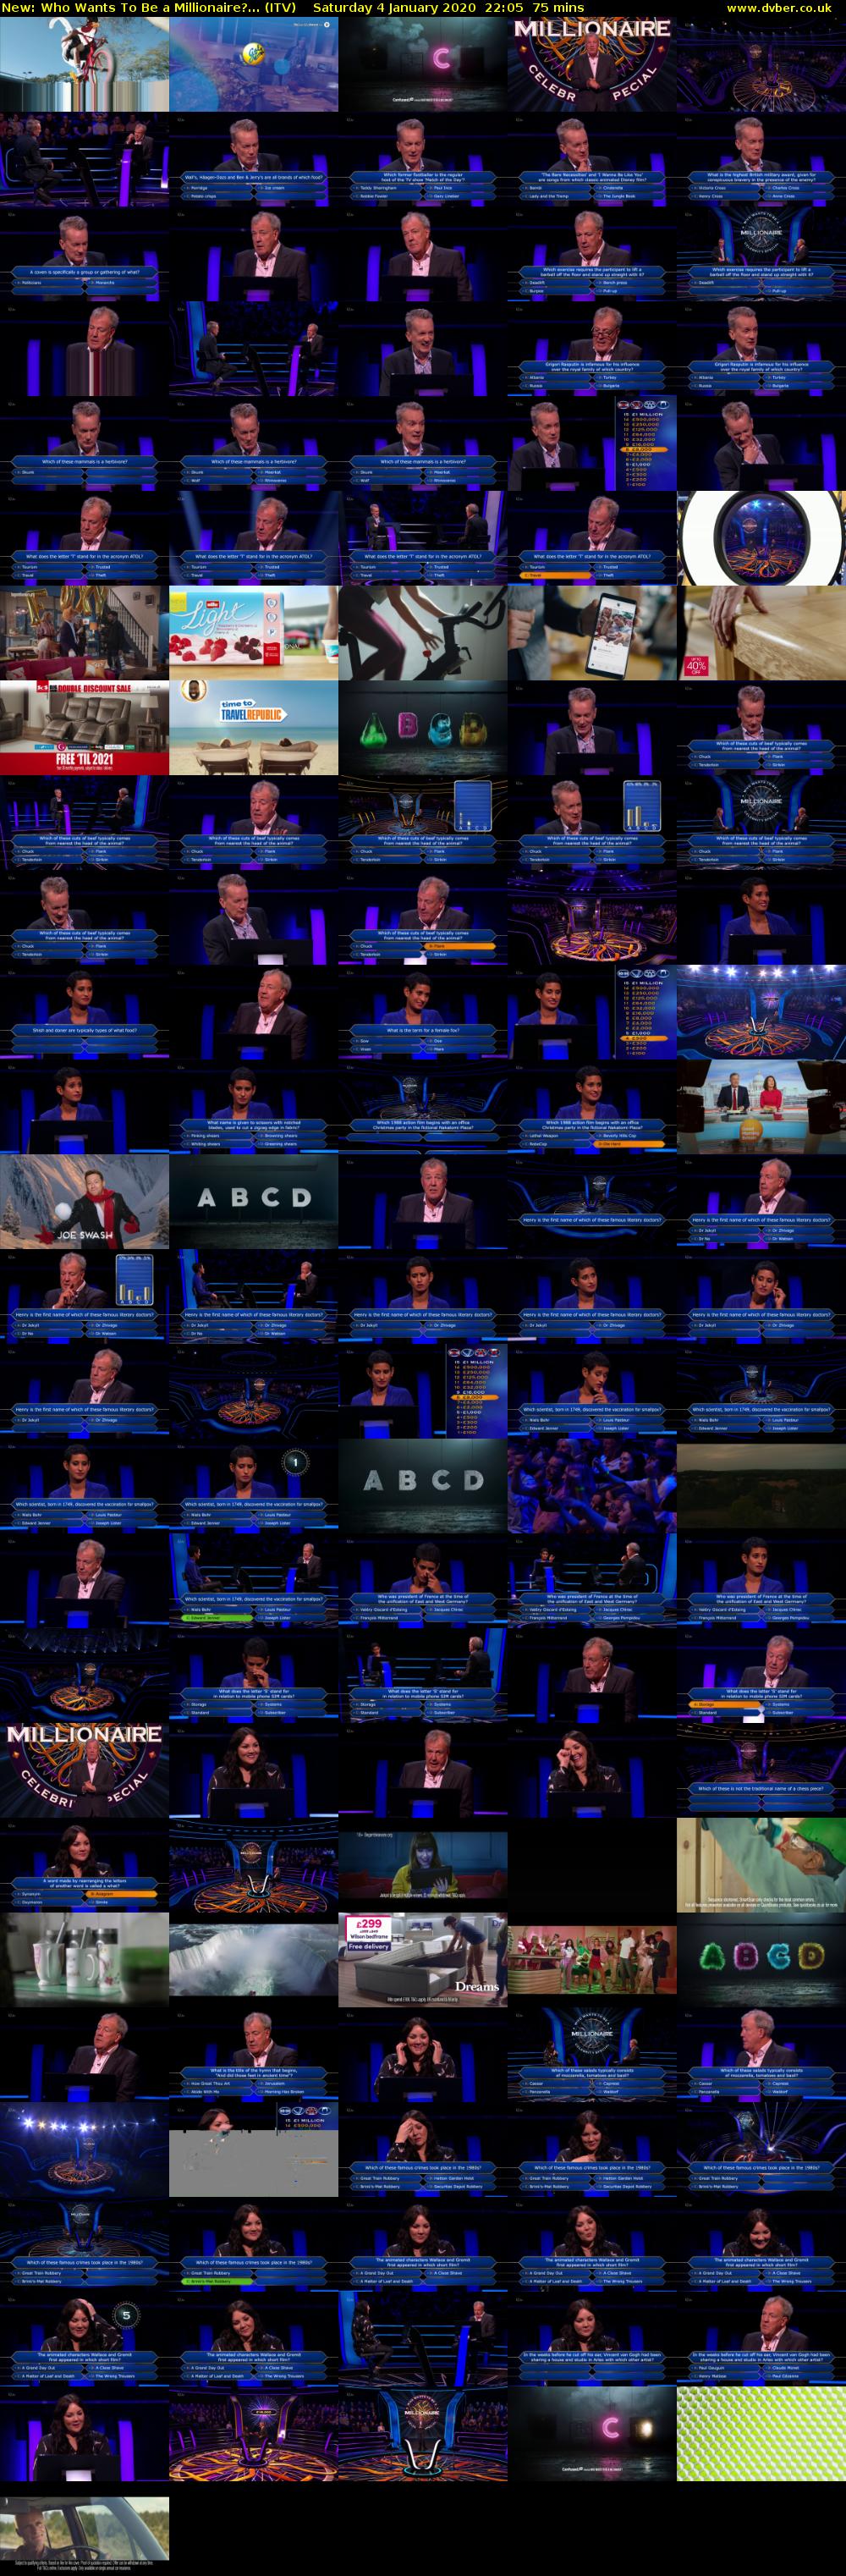 Who Wants To Be a Millionaire?... (ITV) Saturday 4 January 2020 22:05 - 23:20